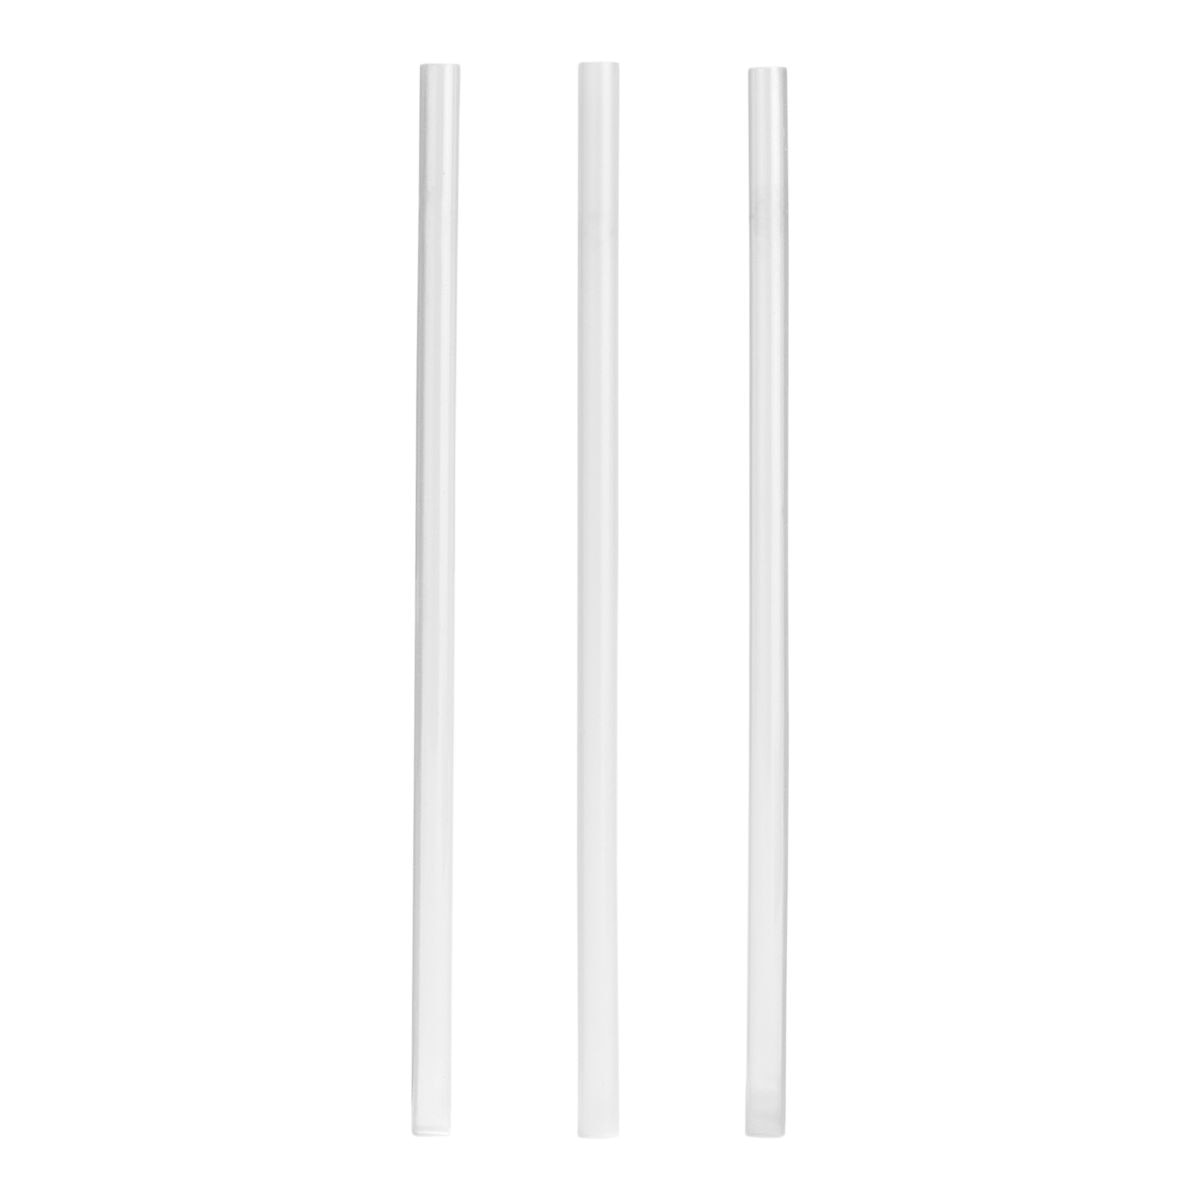 Image of Hydroflask Replacement Straw - 3 Pack